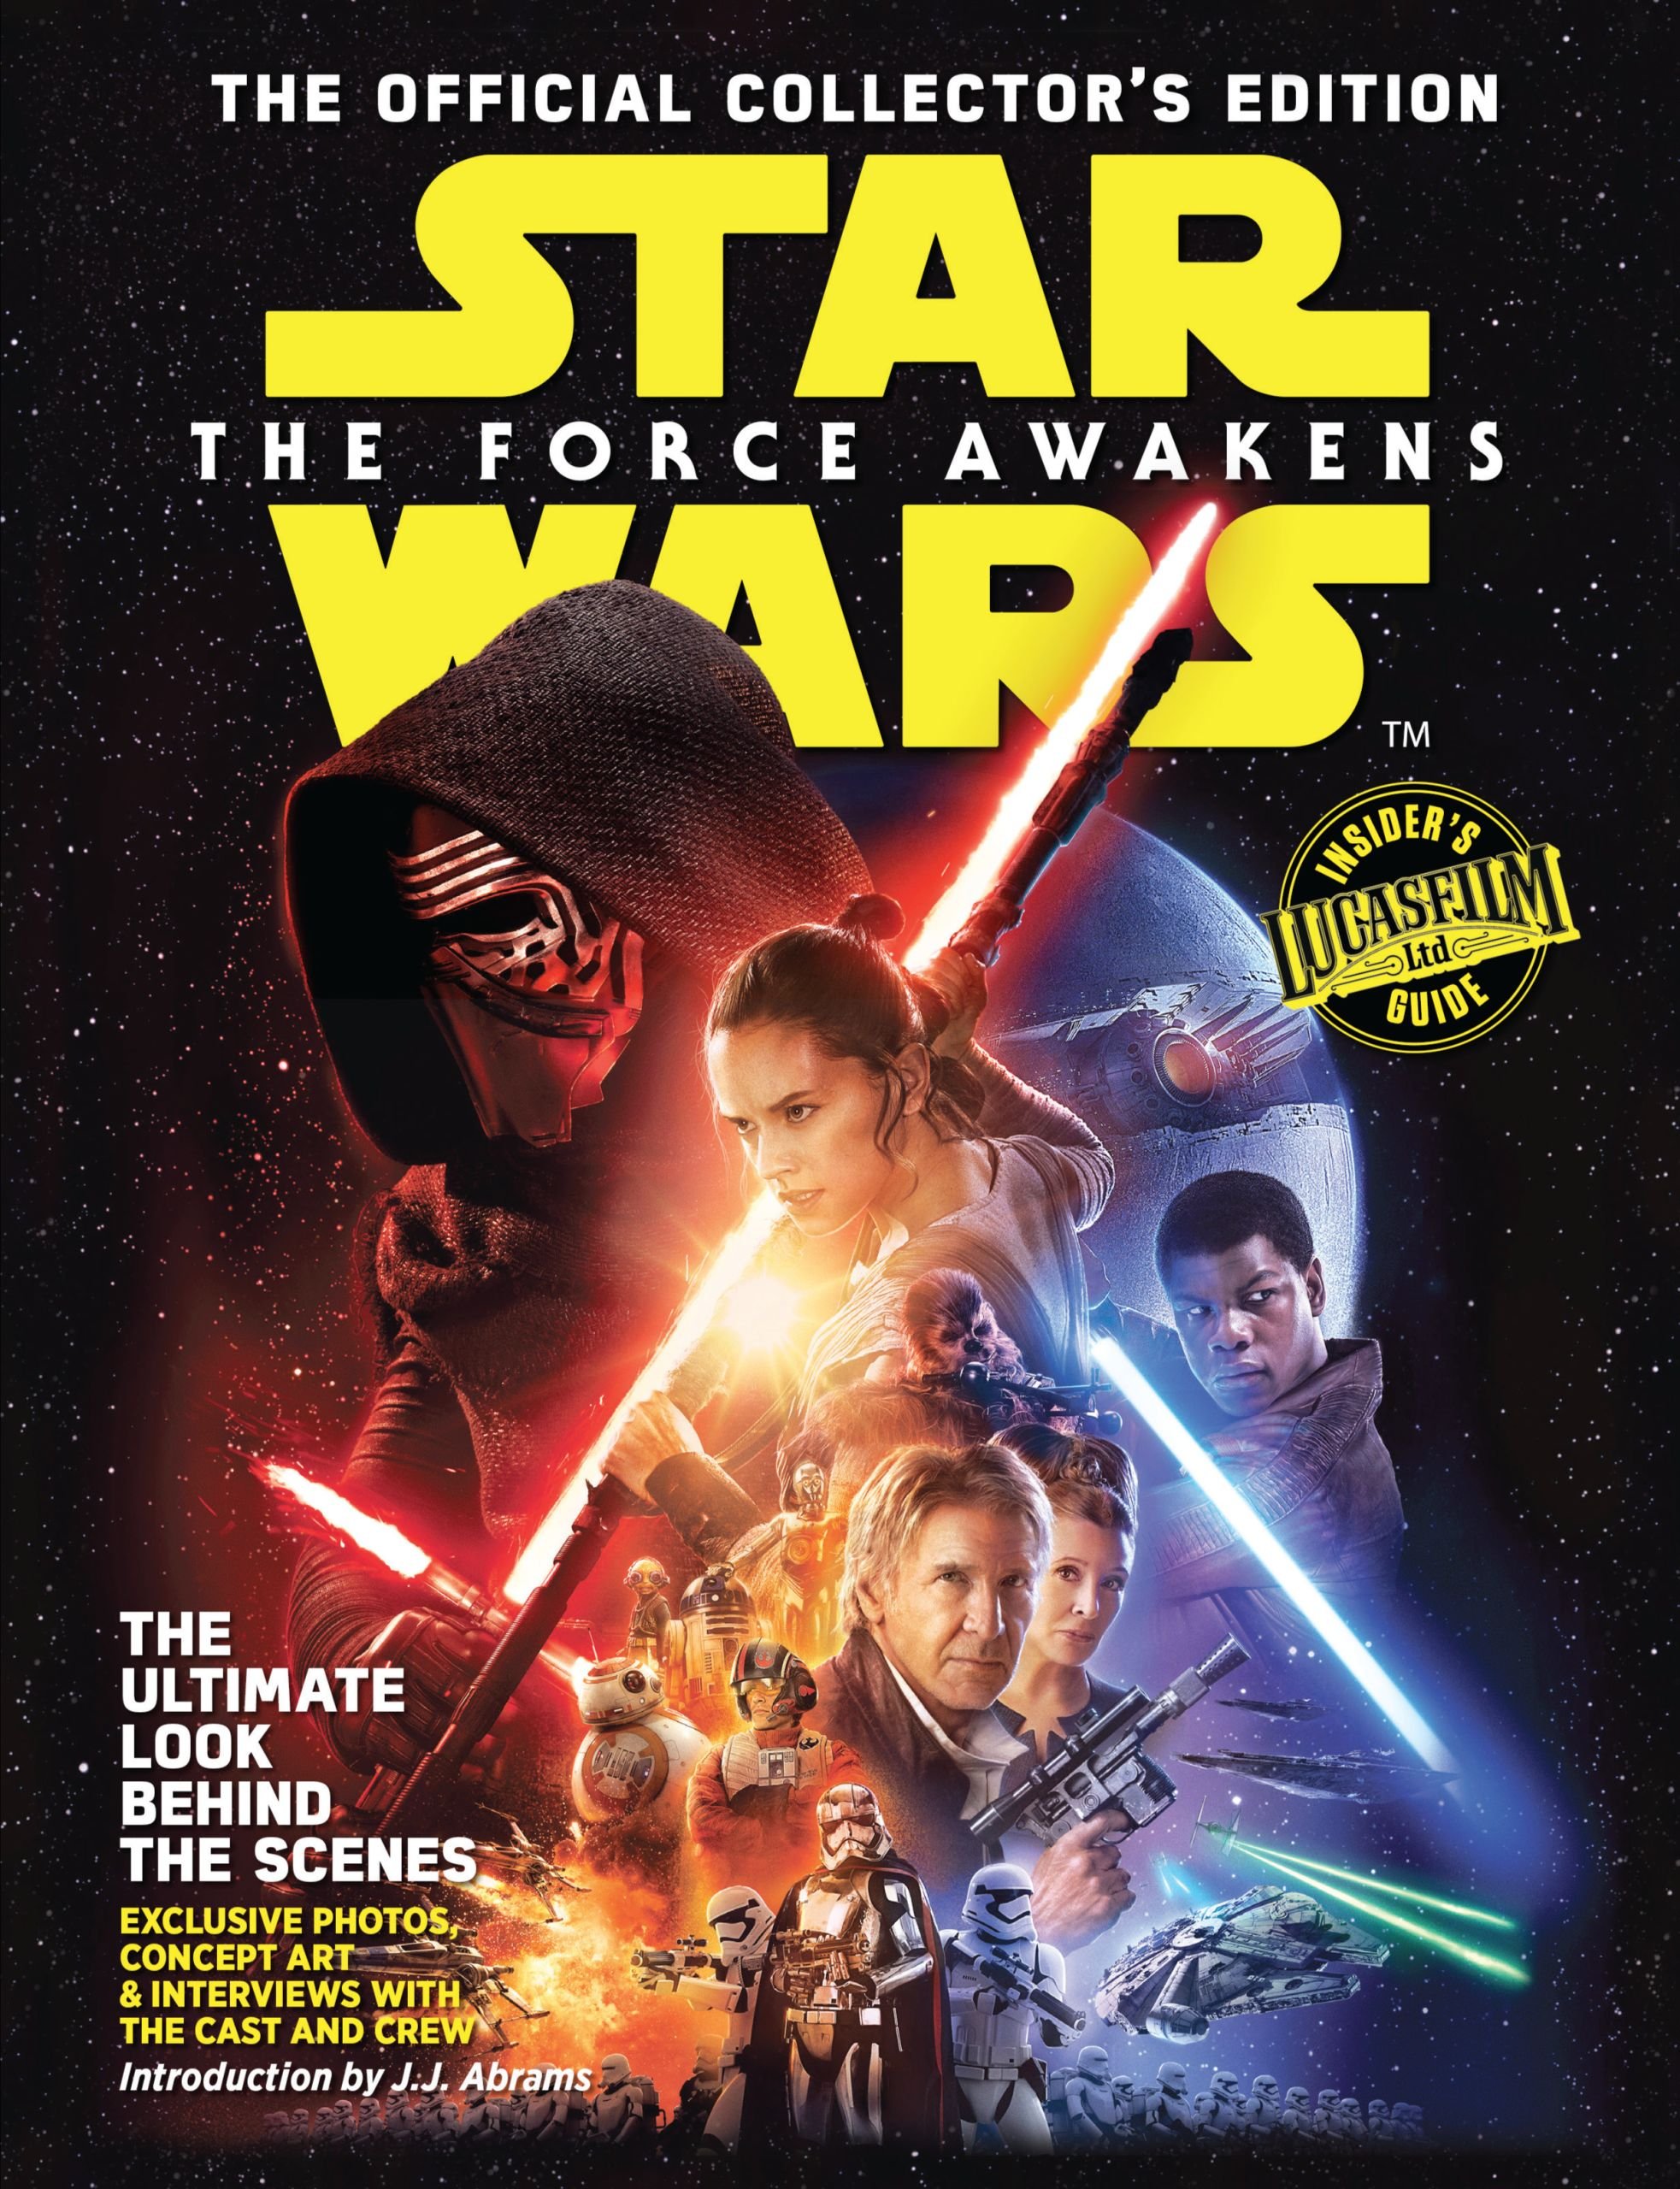 Plik:The Force Awakens- The Official Collector's Edition.jpg